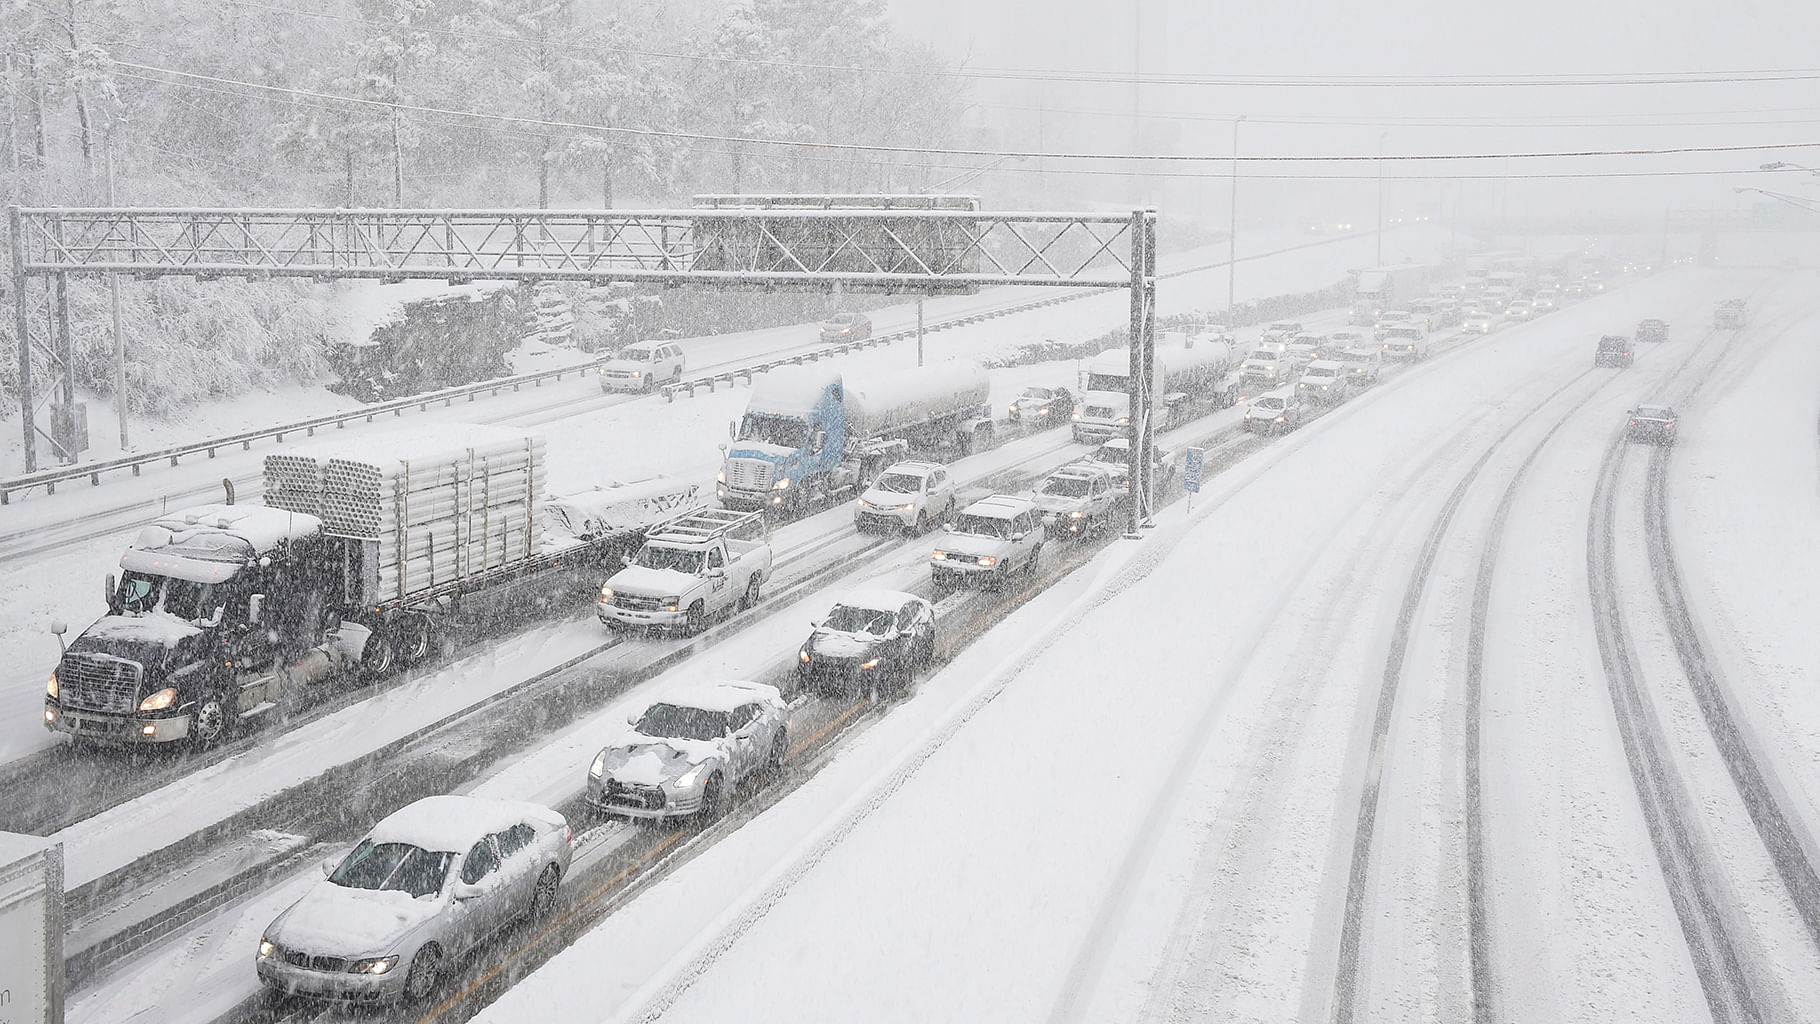 Snow slows down traffic on Interstate 40, Friday morning, Jan. 22, 2016, in Nashville, Tennessee. (Photo: AP)